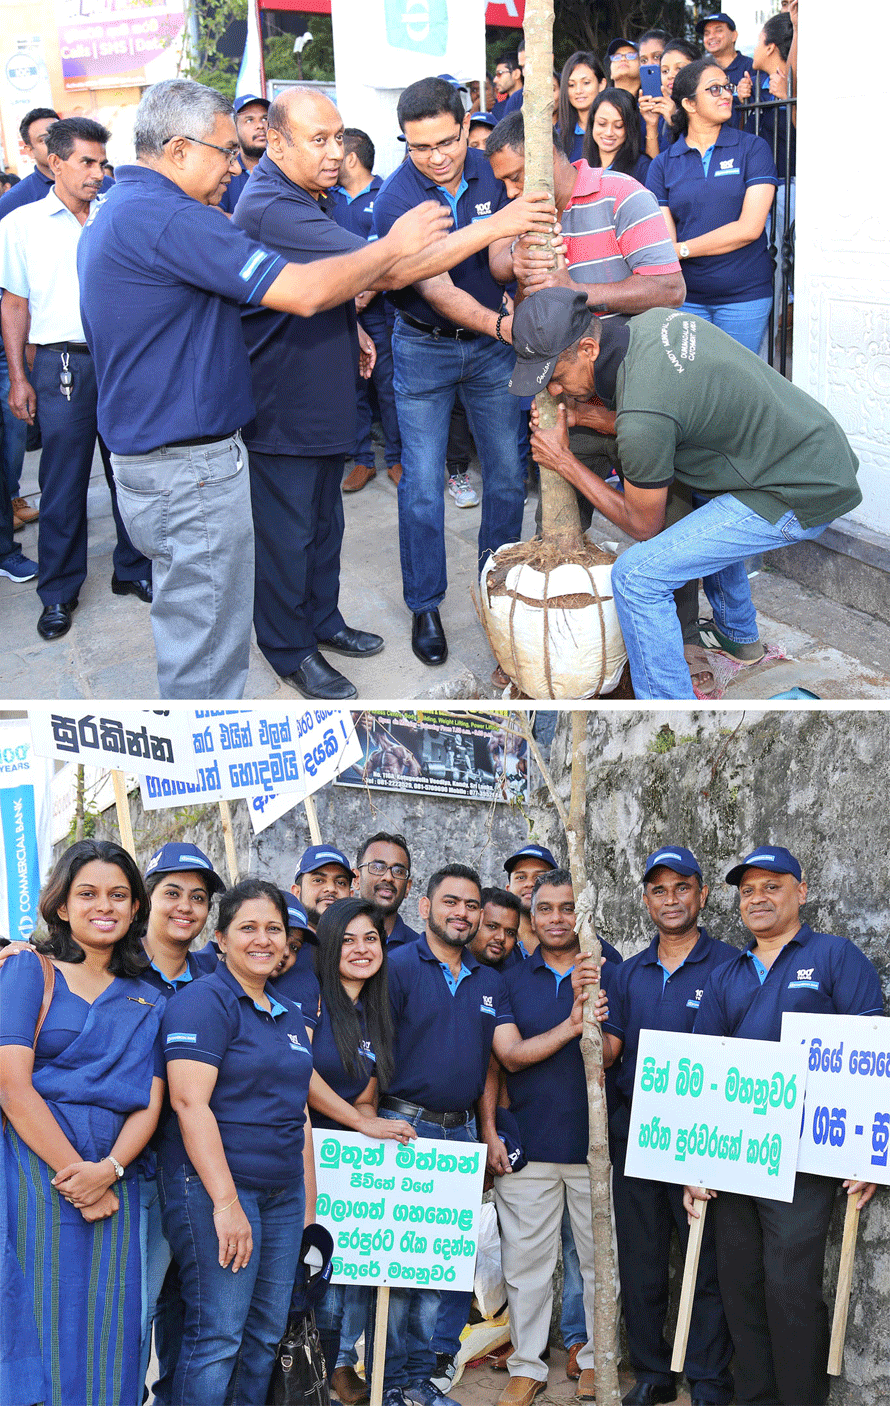 ComBank plants trees in Kandy City as part of centenary celebrations